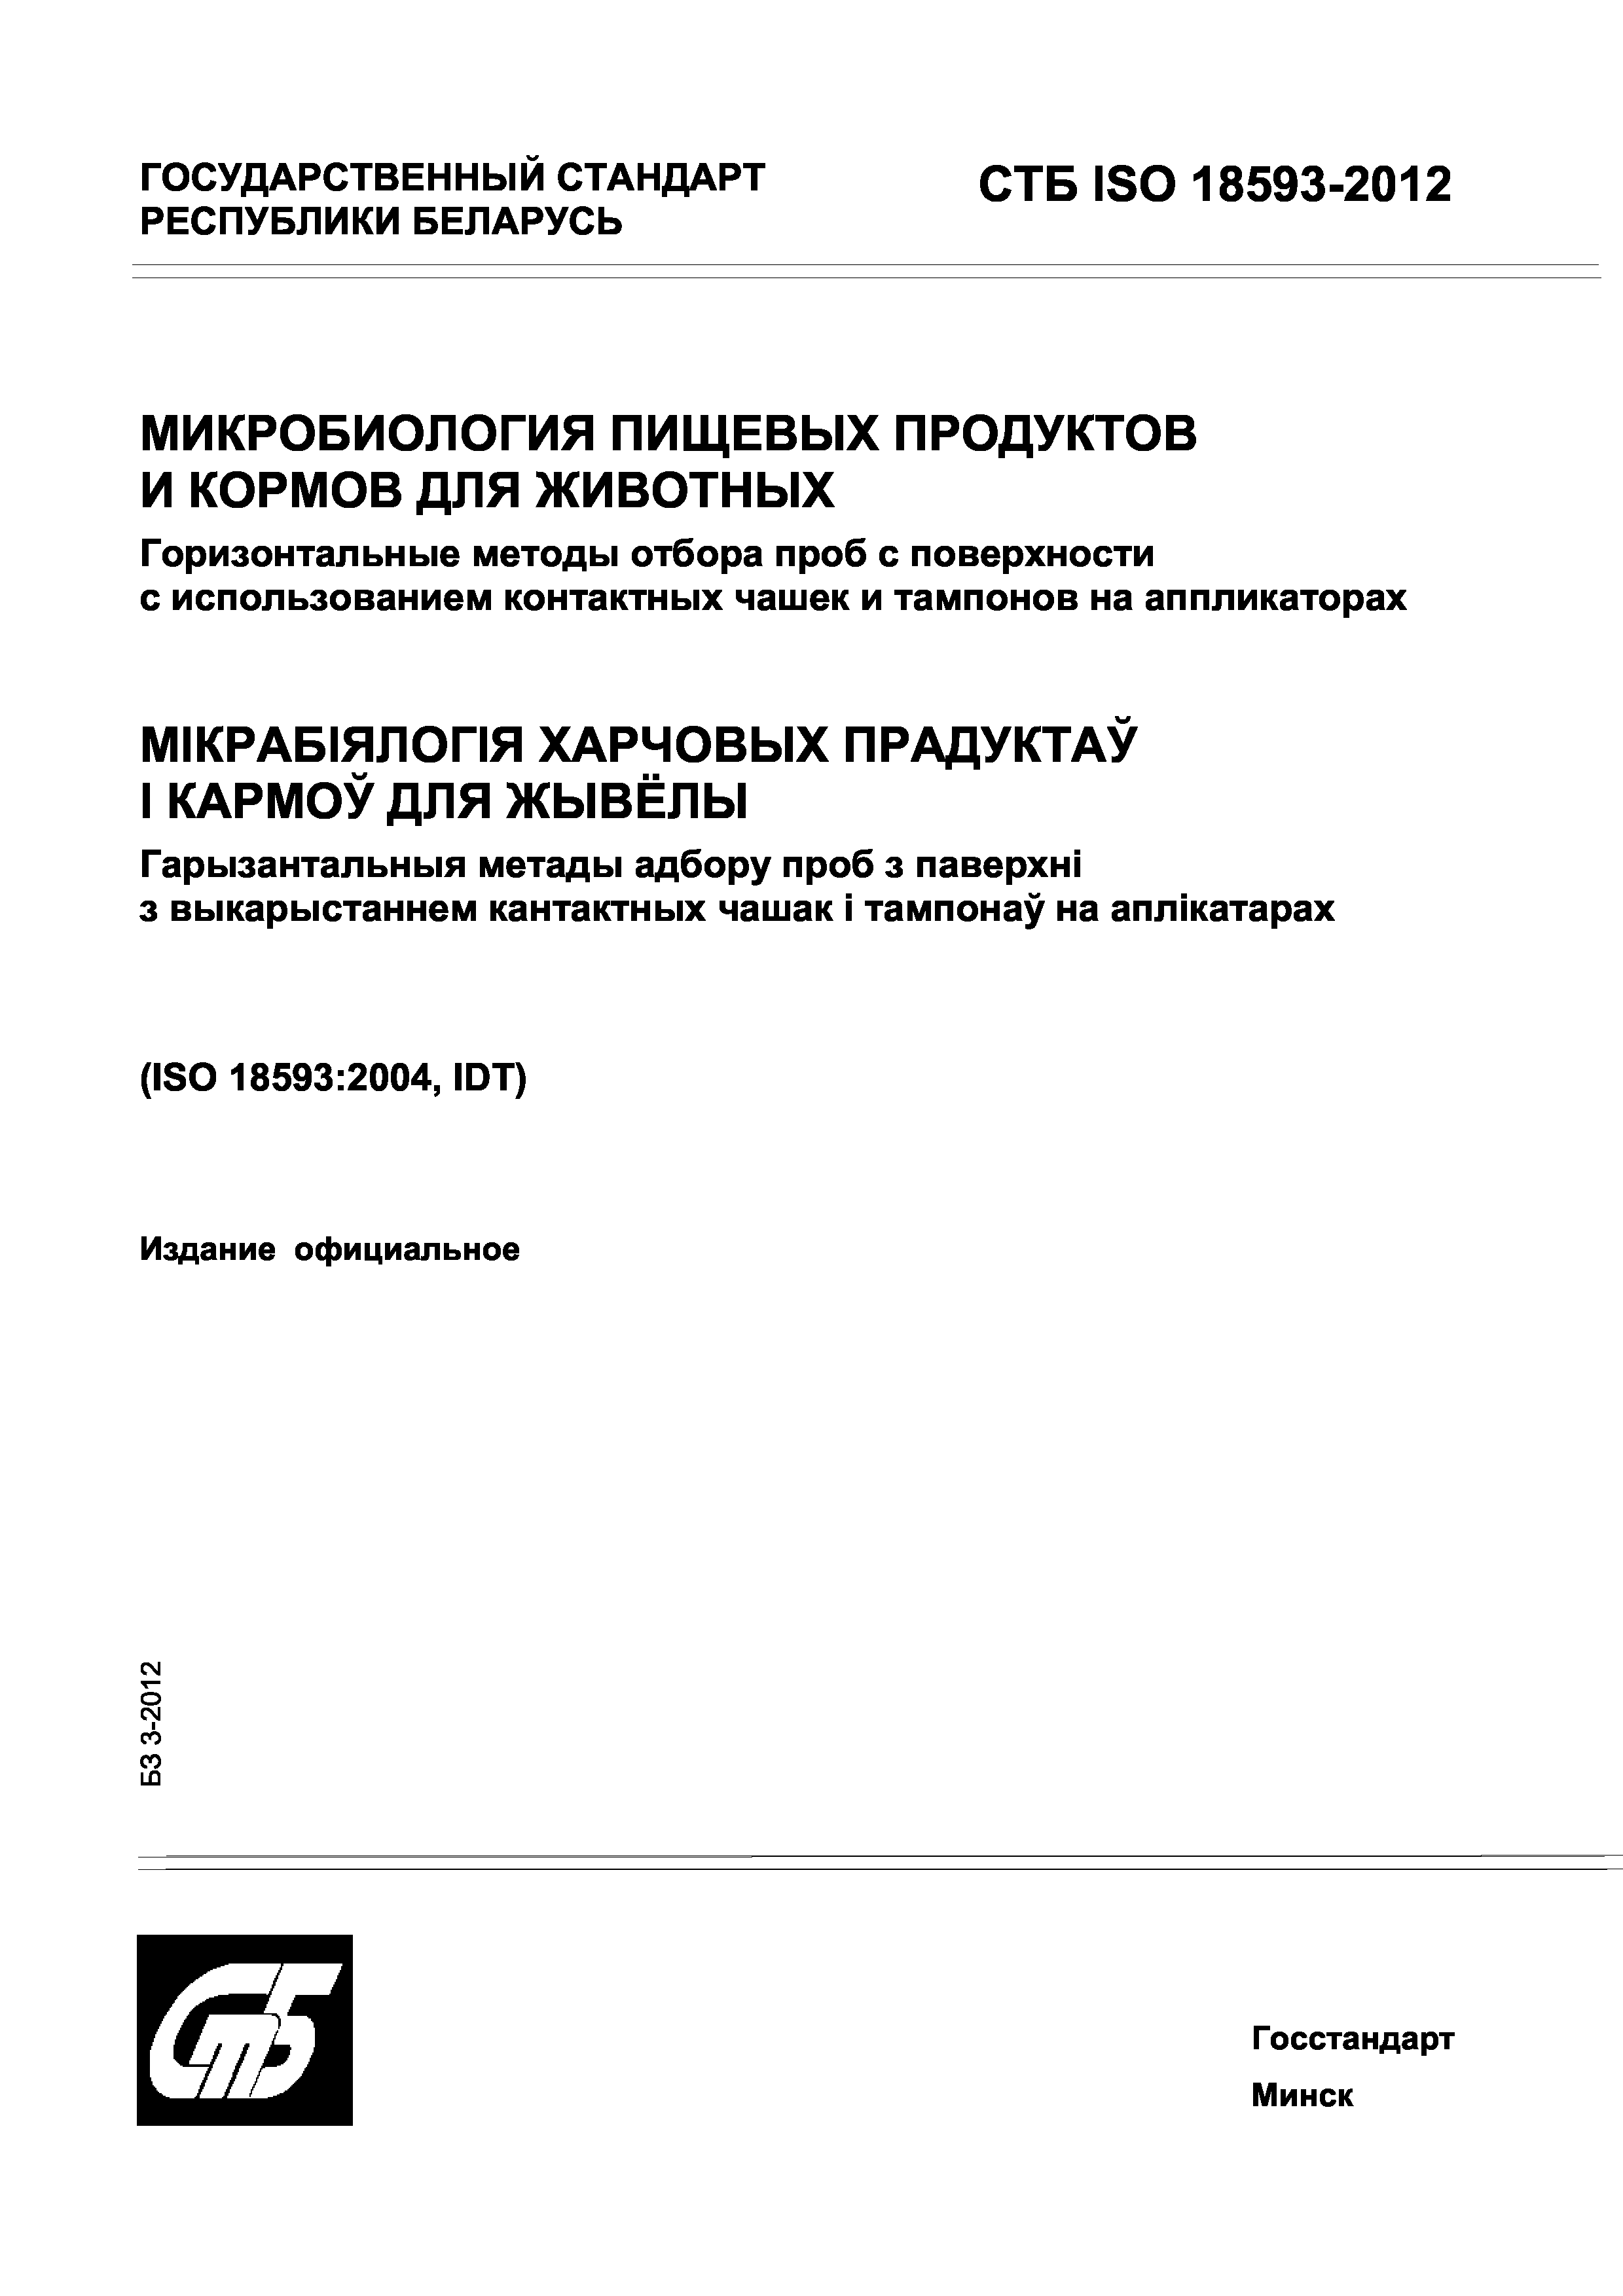 СТБ ISO 18593-2012